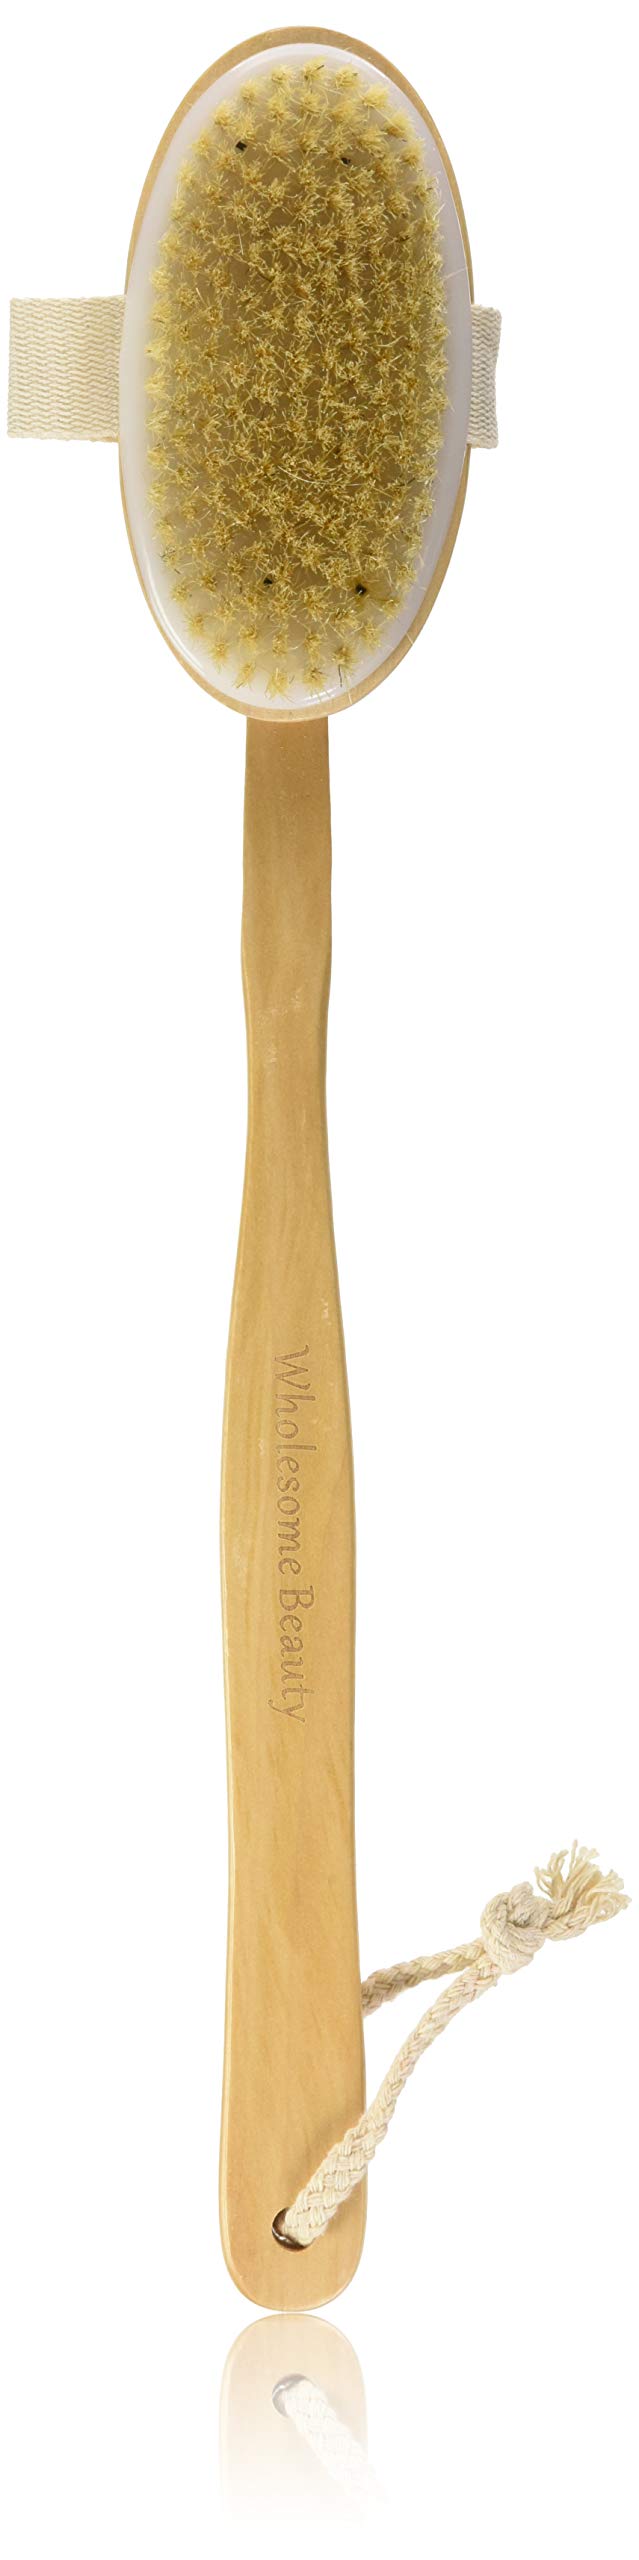 Wholesome Beauty Dry Skin Body Brush with Removable 11-Inch Wood Handle